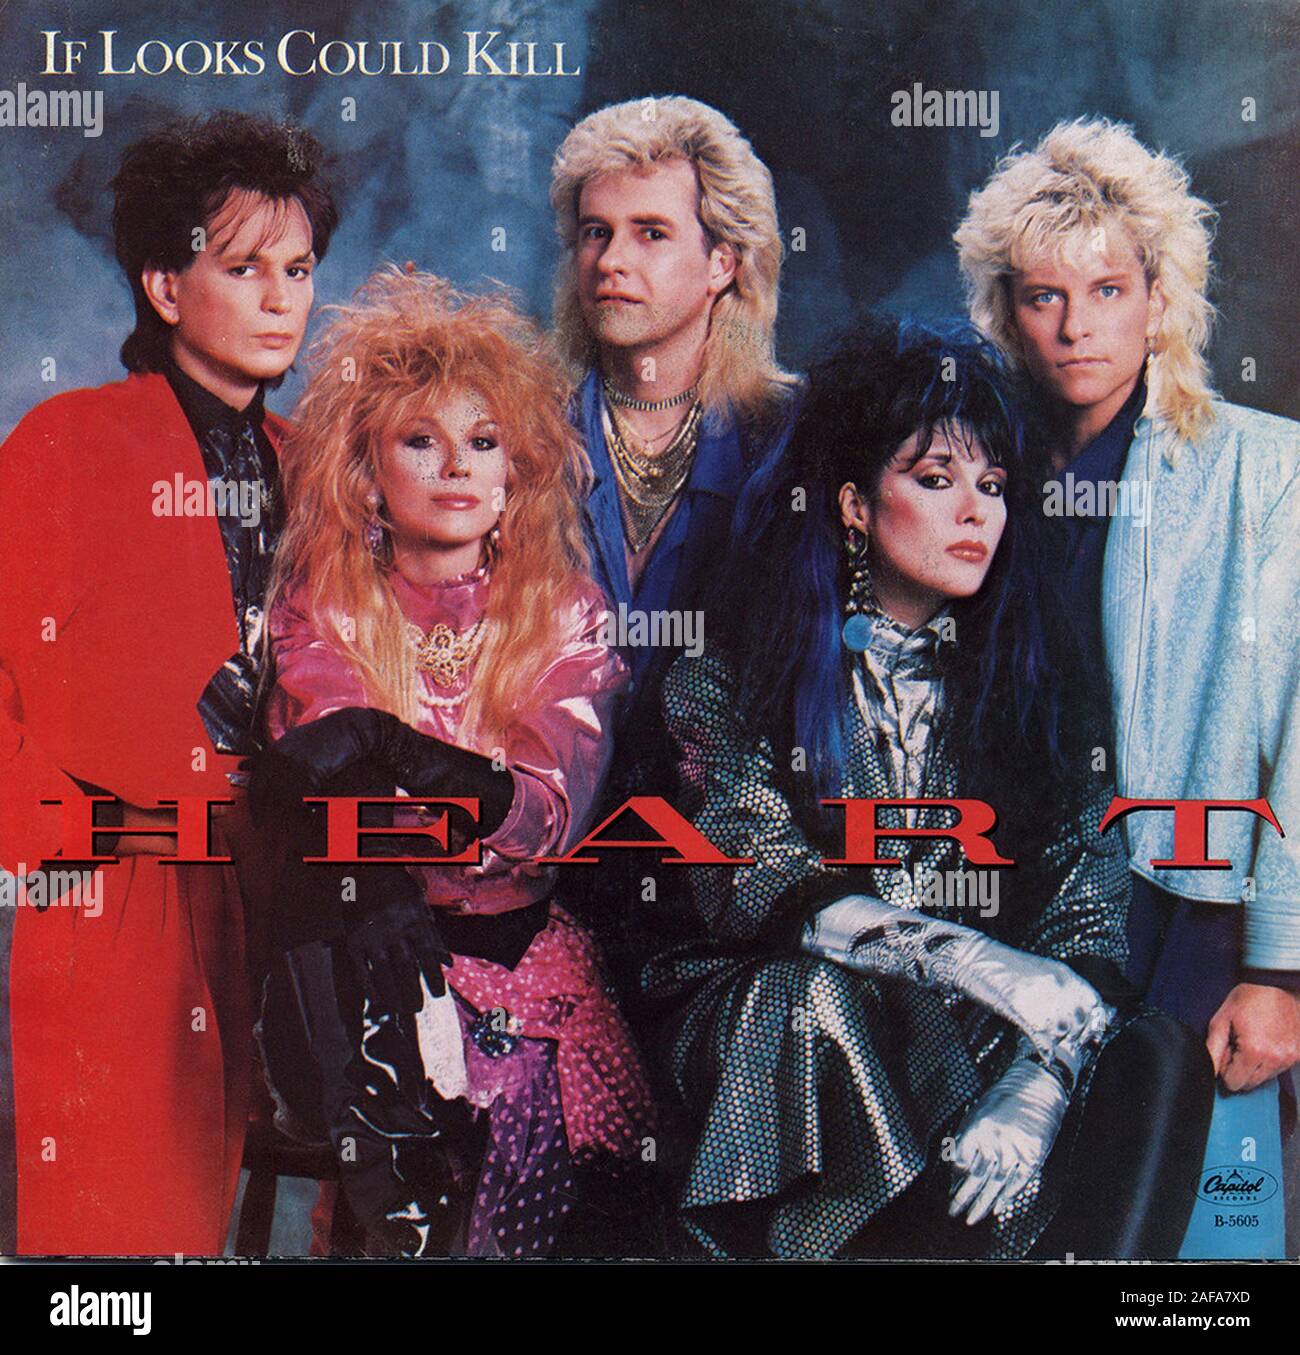 Heart - If Looks Could Kill - Vintage vinyl album cover Stock Photo